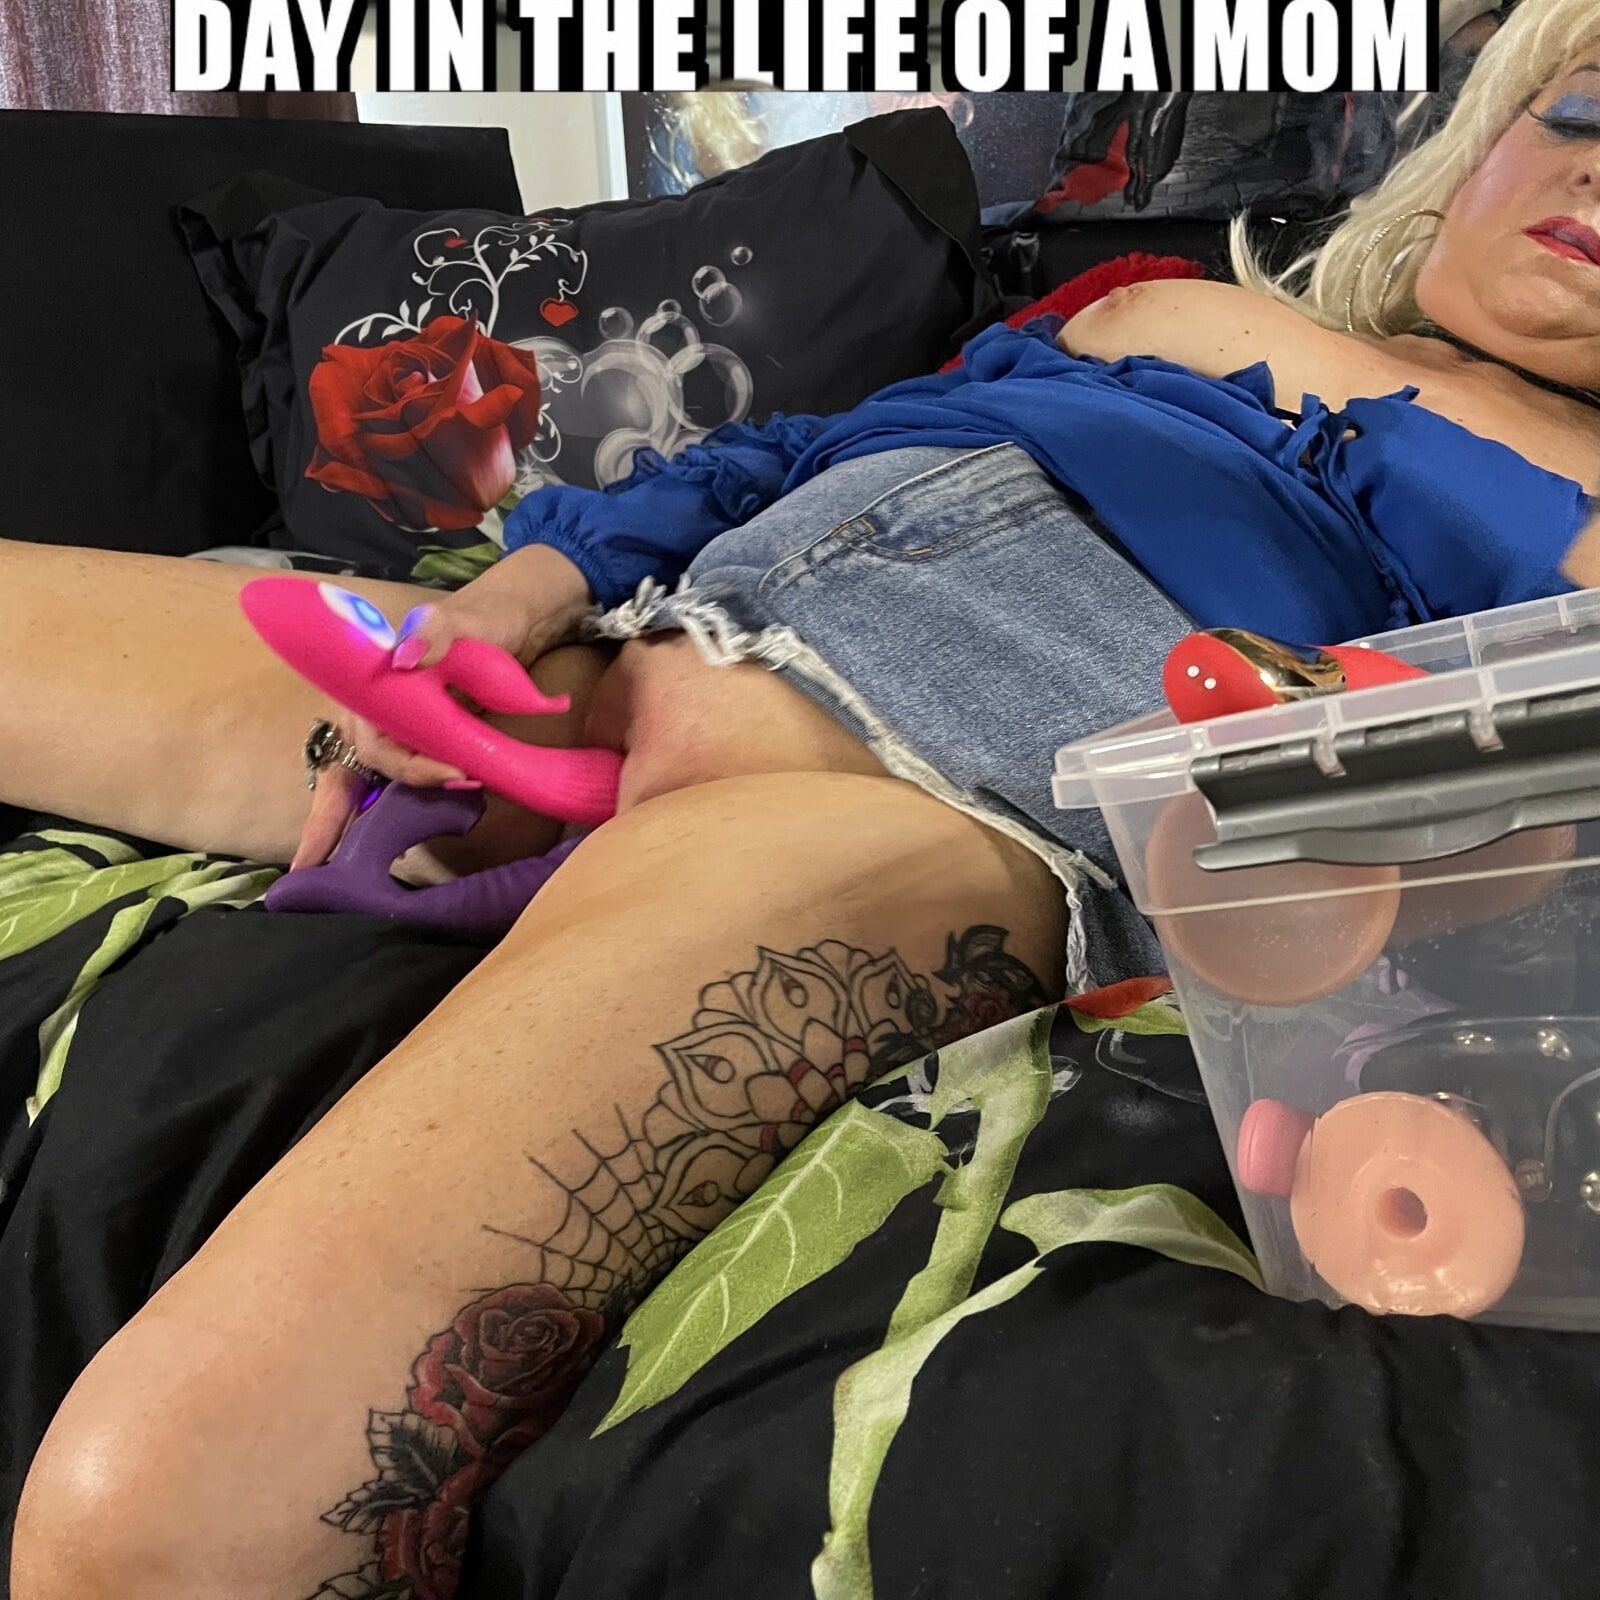 DAY IN THE LIFE OF A MOM SHIRLEY #28